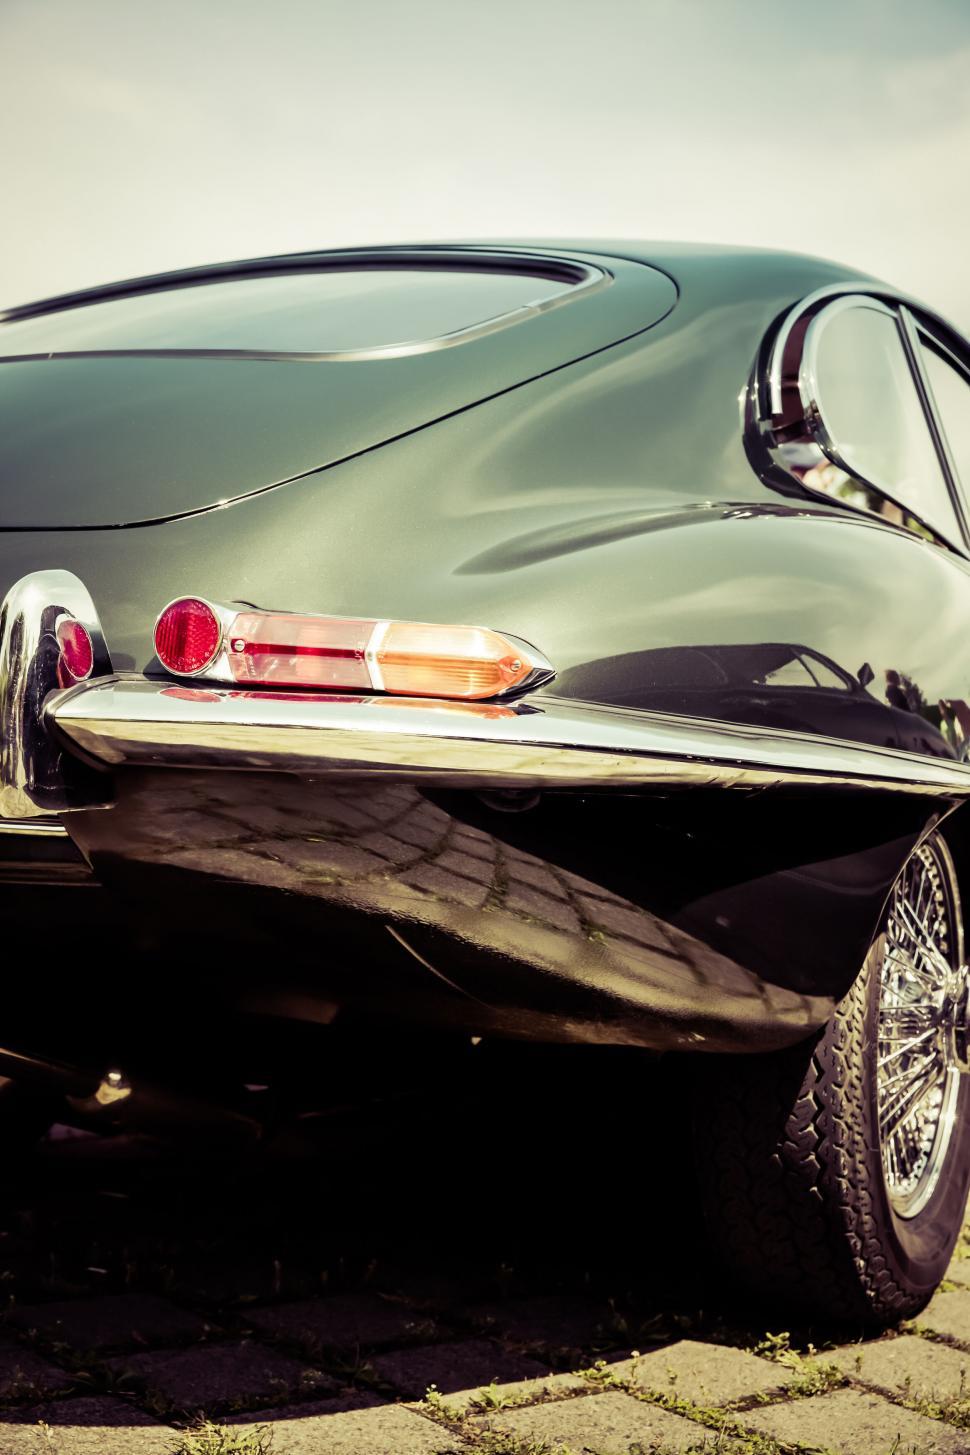 Free Image of Vintage car rear view with stylish tail lights 